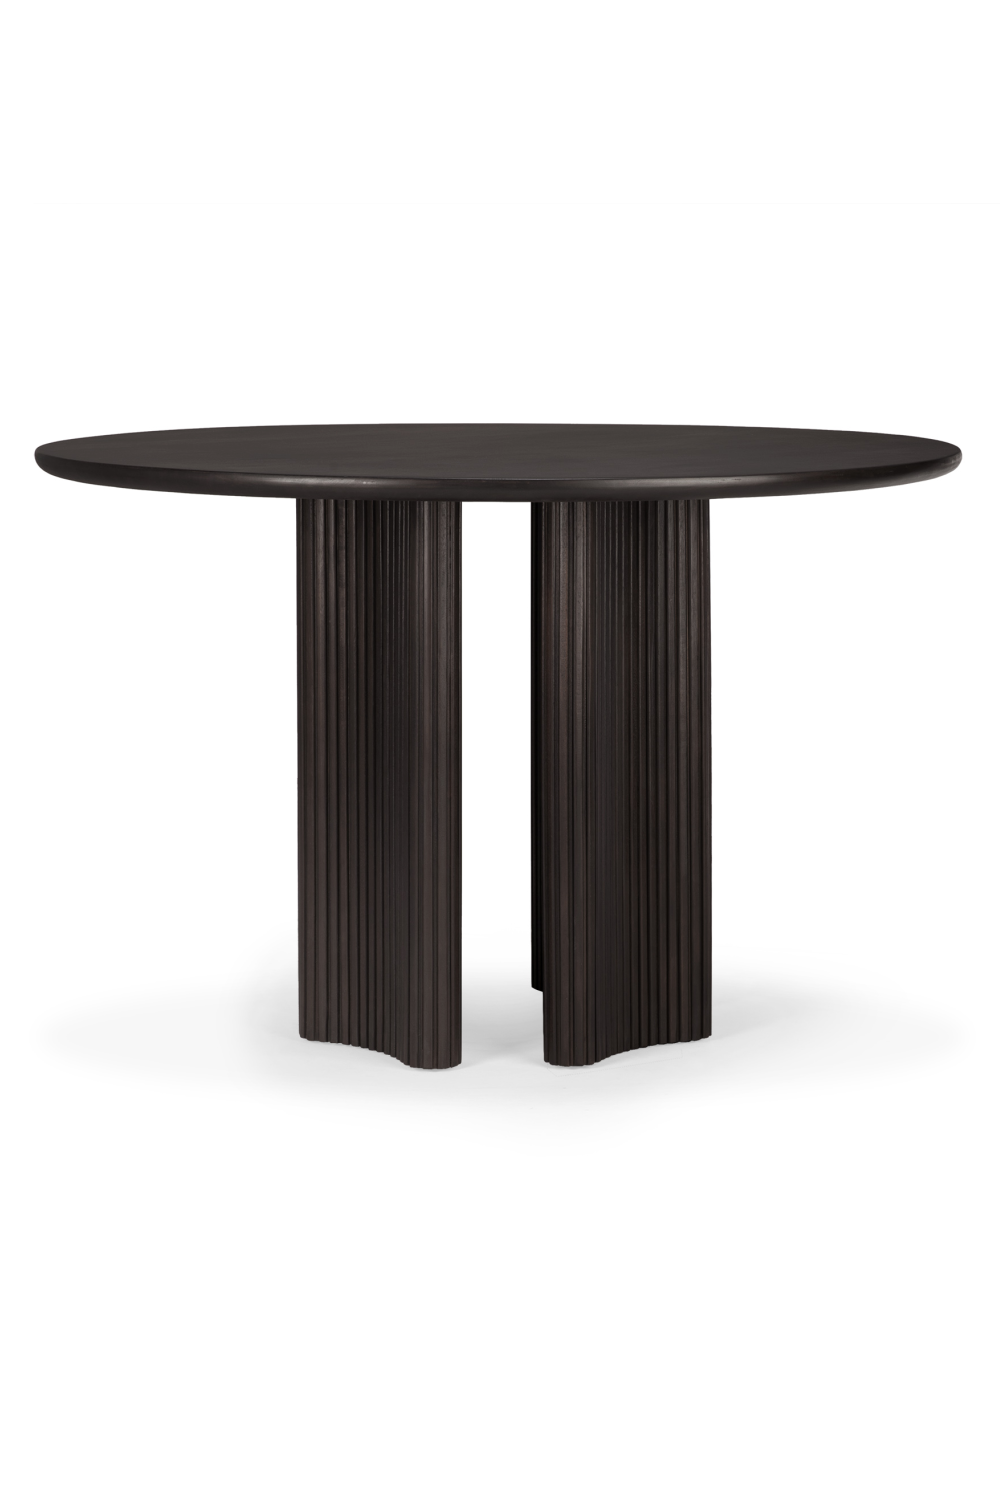 Brown Mahogany Dining Table | Ethnicraft Roller Max | Woodfurniture.com